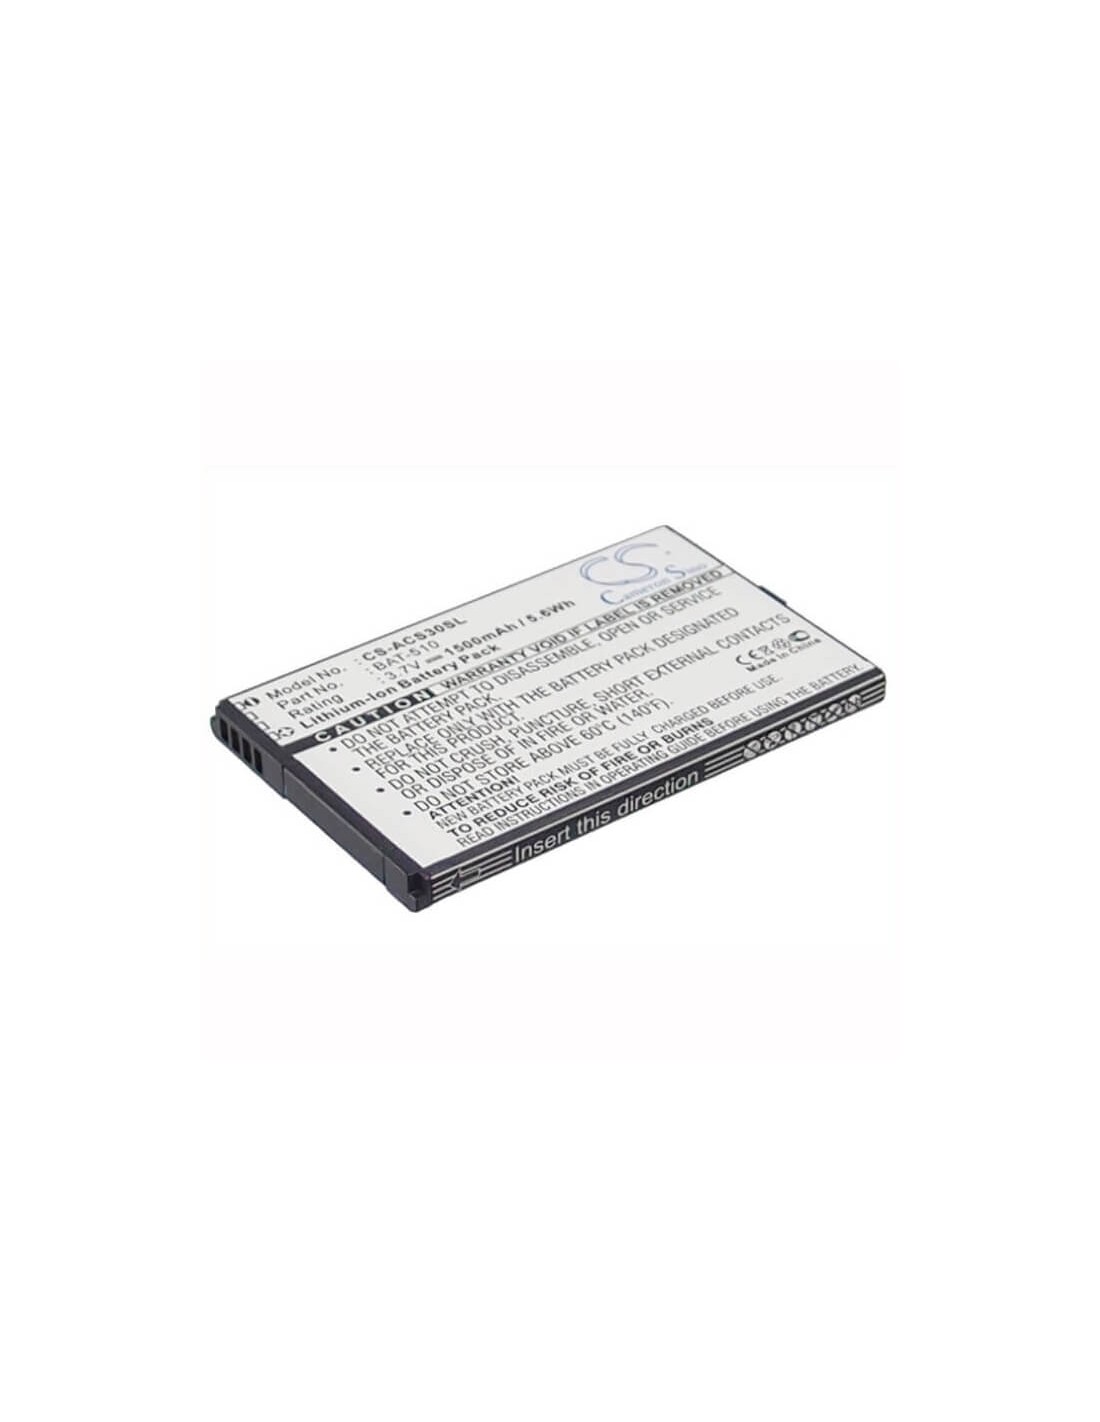 Battery for Acer Iconia Smart, S300 3.7V, 1500mAh - 5.55Wh